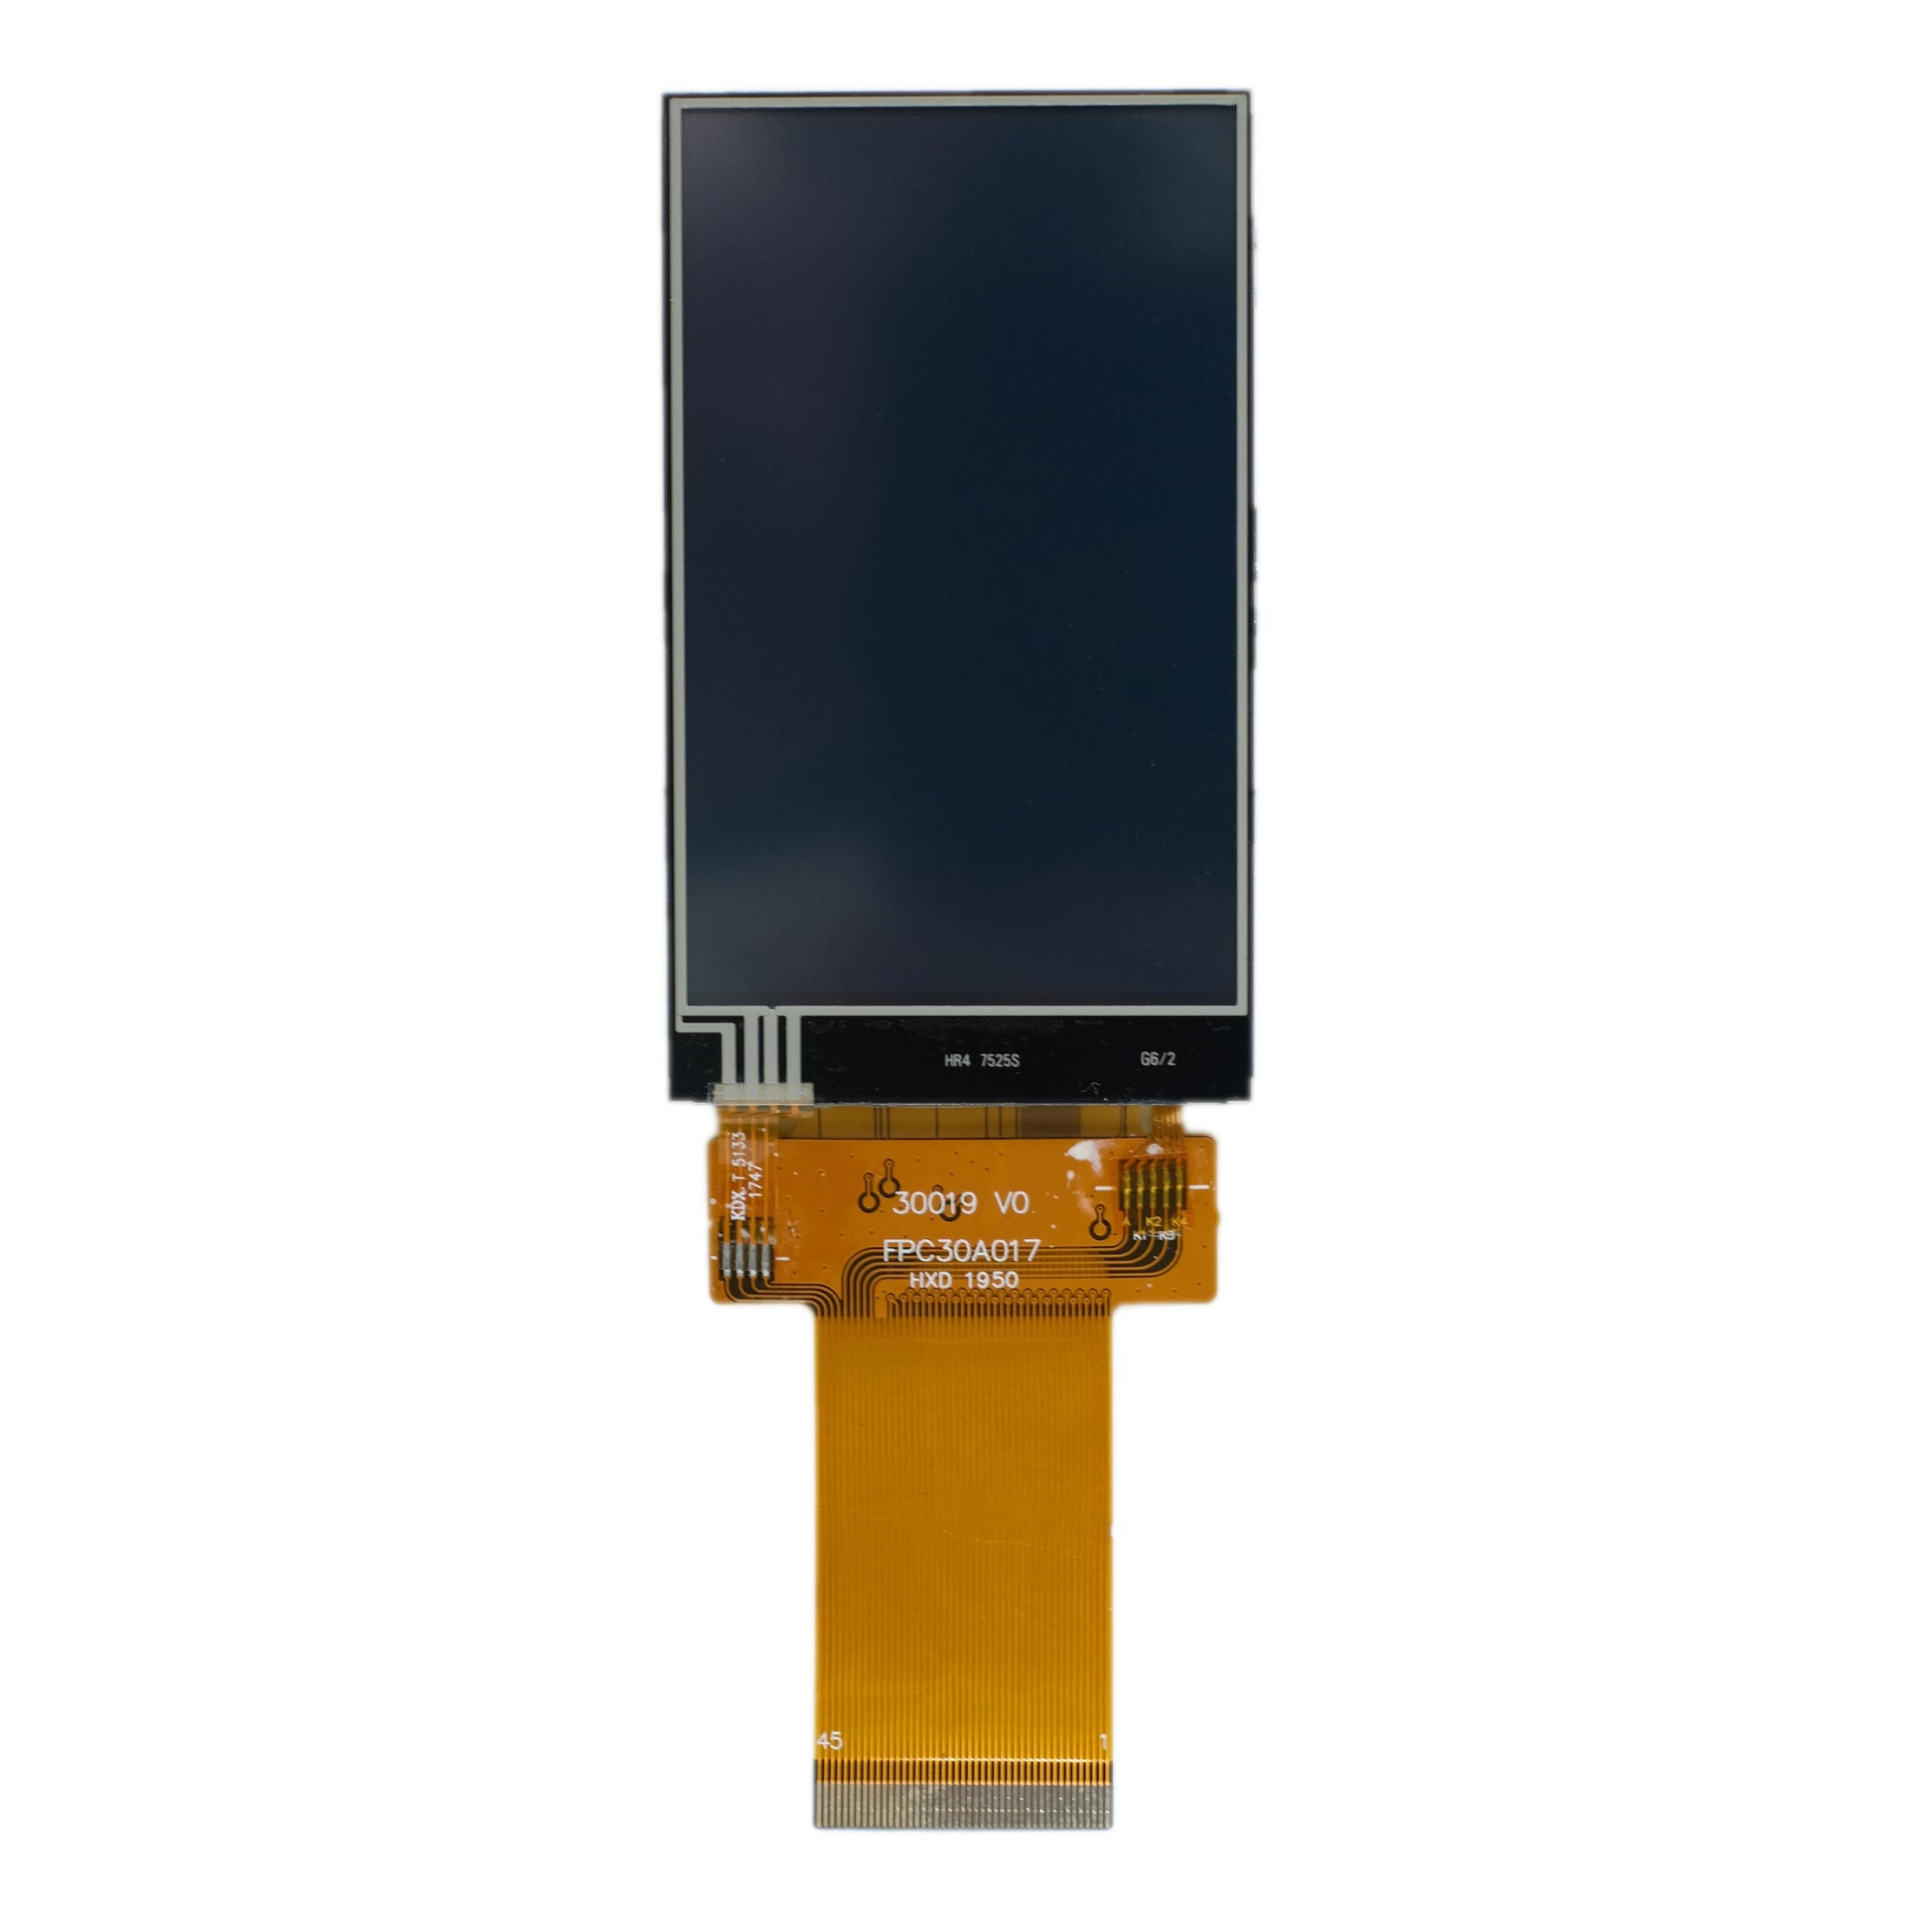 3.0-inch 240x400 IPS display panel with resistive touch and SPI, MCU, RGB interfaces